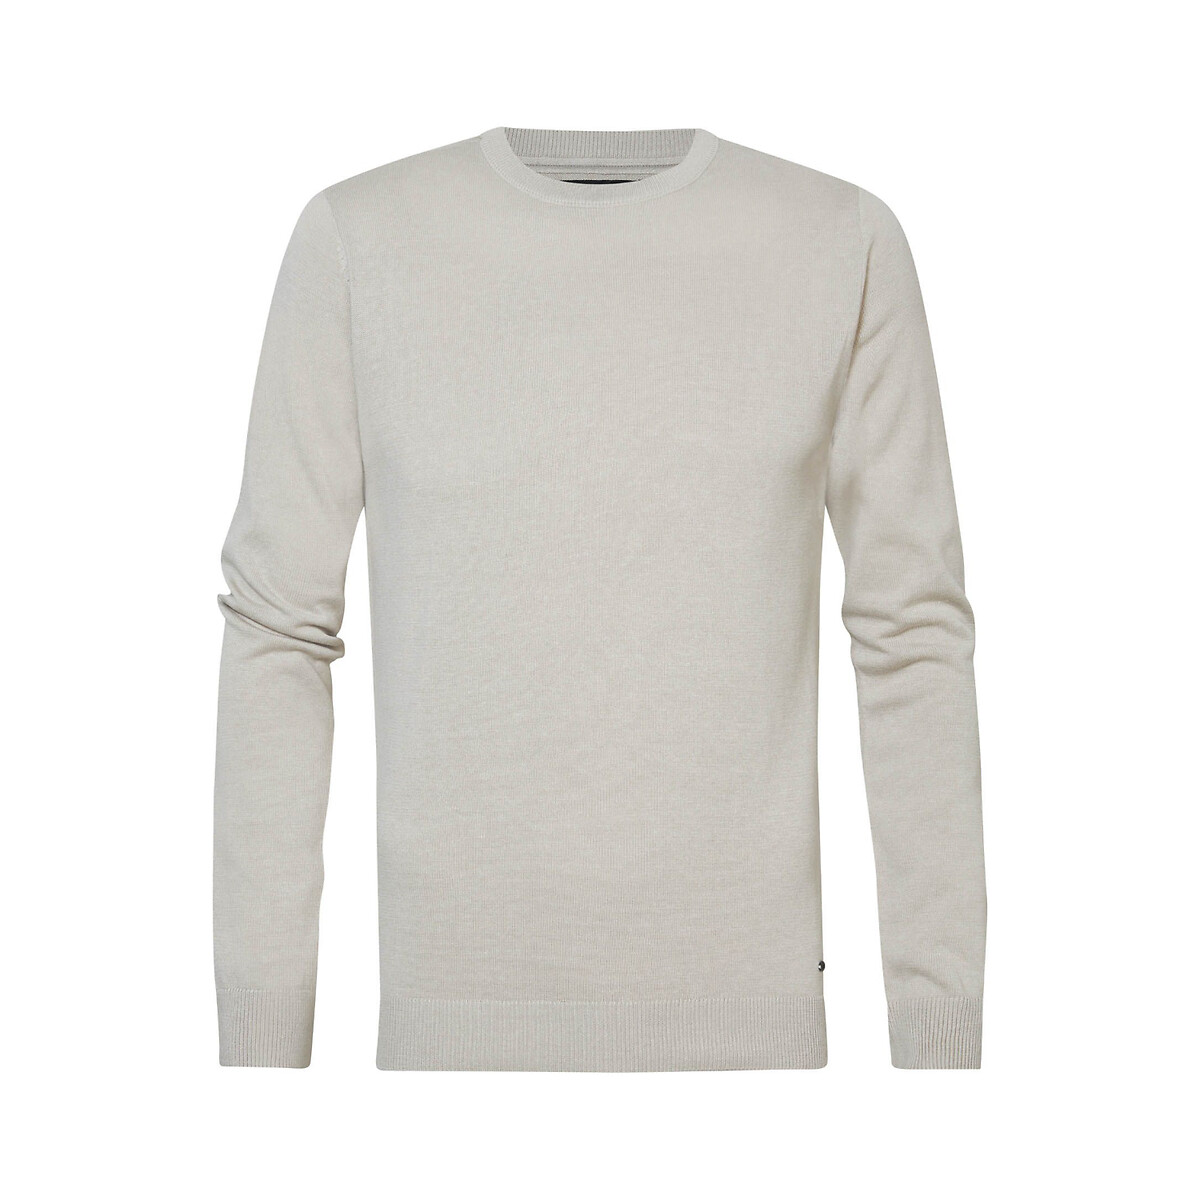 Cotton Mix Jumper with Crew Neck